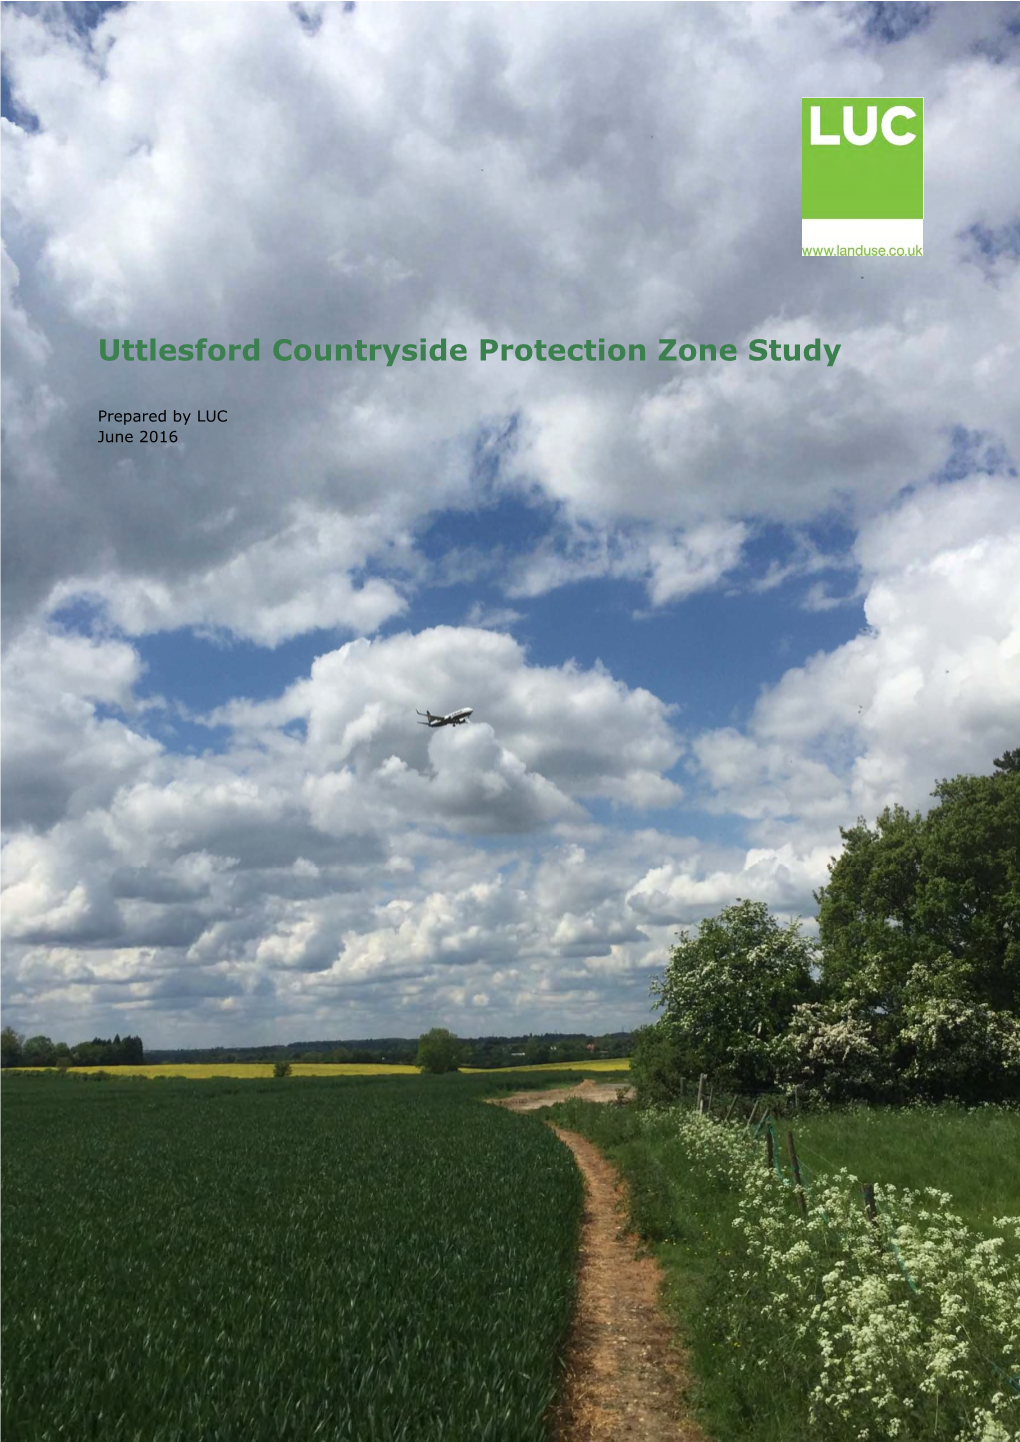 Uttlesford Countryside Protection Zone Study